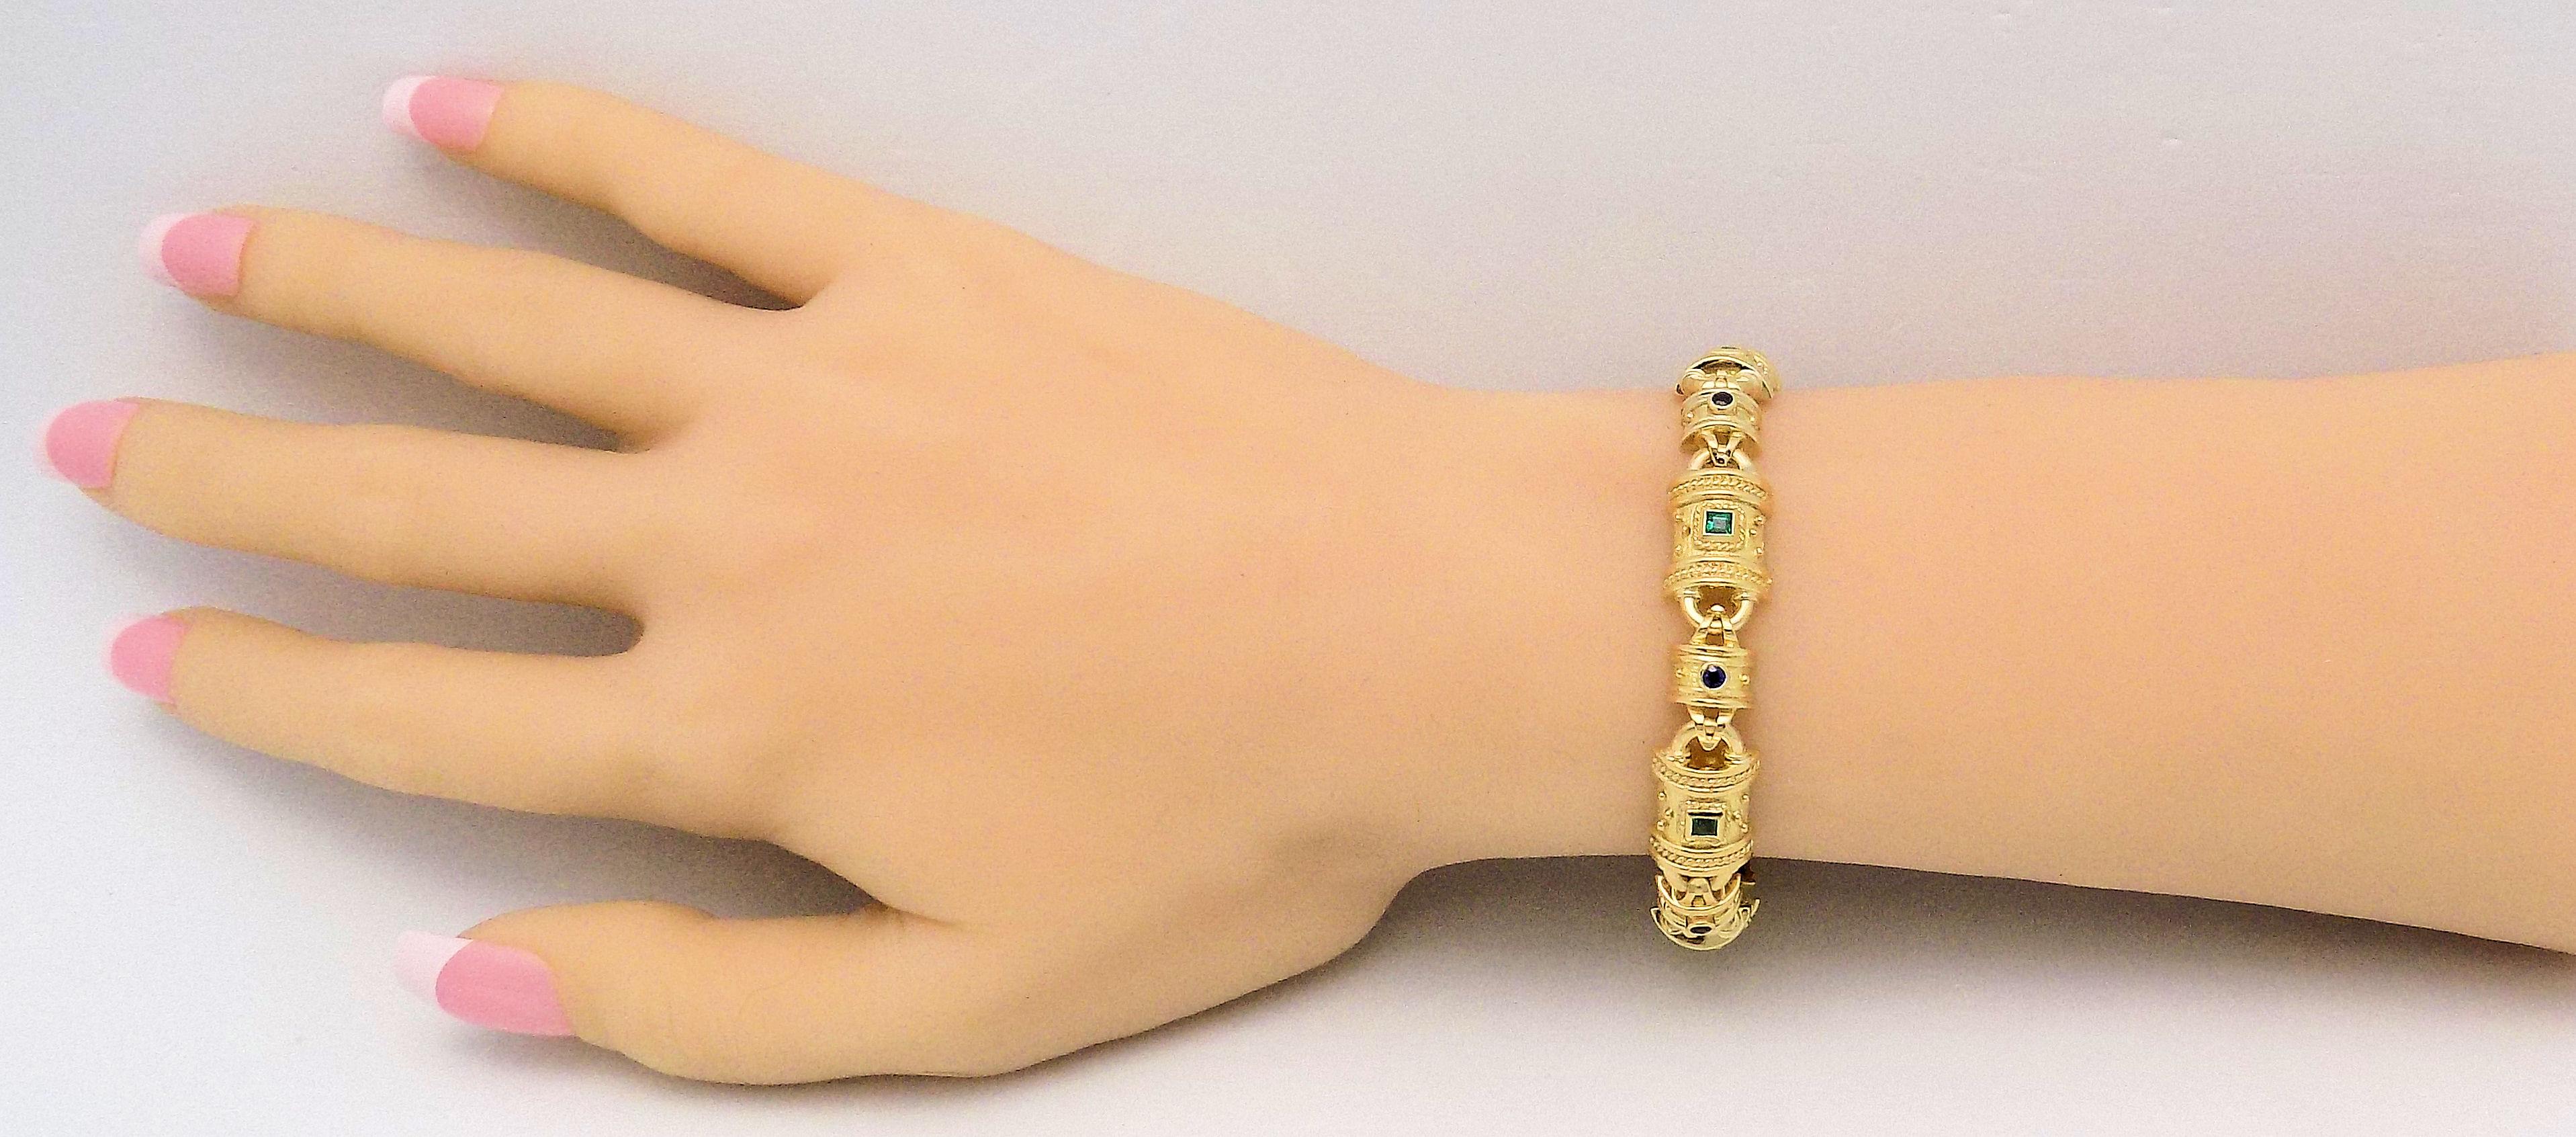 18 Karat Yellow Gold Bracelet with Bead and Twist Detail featuring 6 Square Cut Emeralds 3 X 3 MM, 6 Round Cut Sapphires 2.5 MM, 7